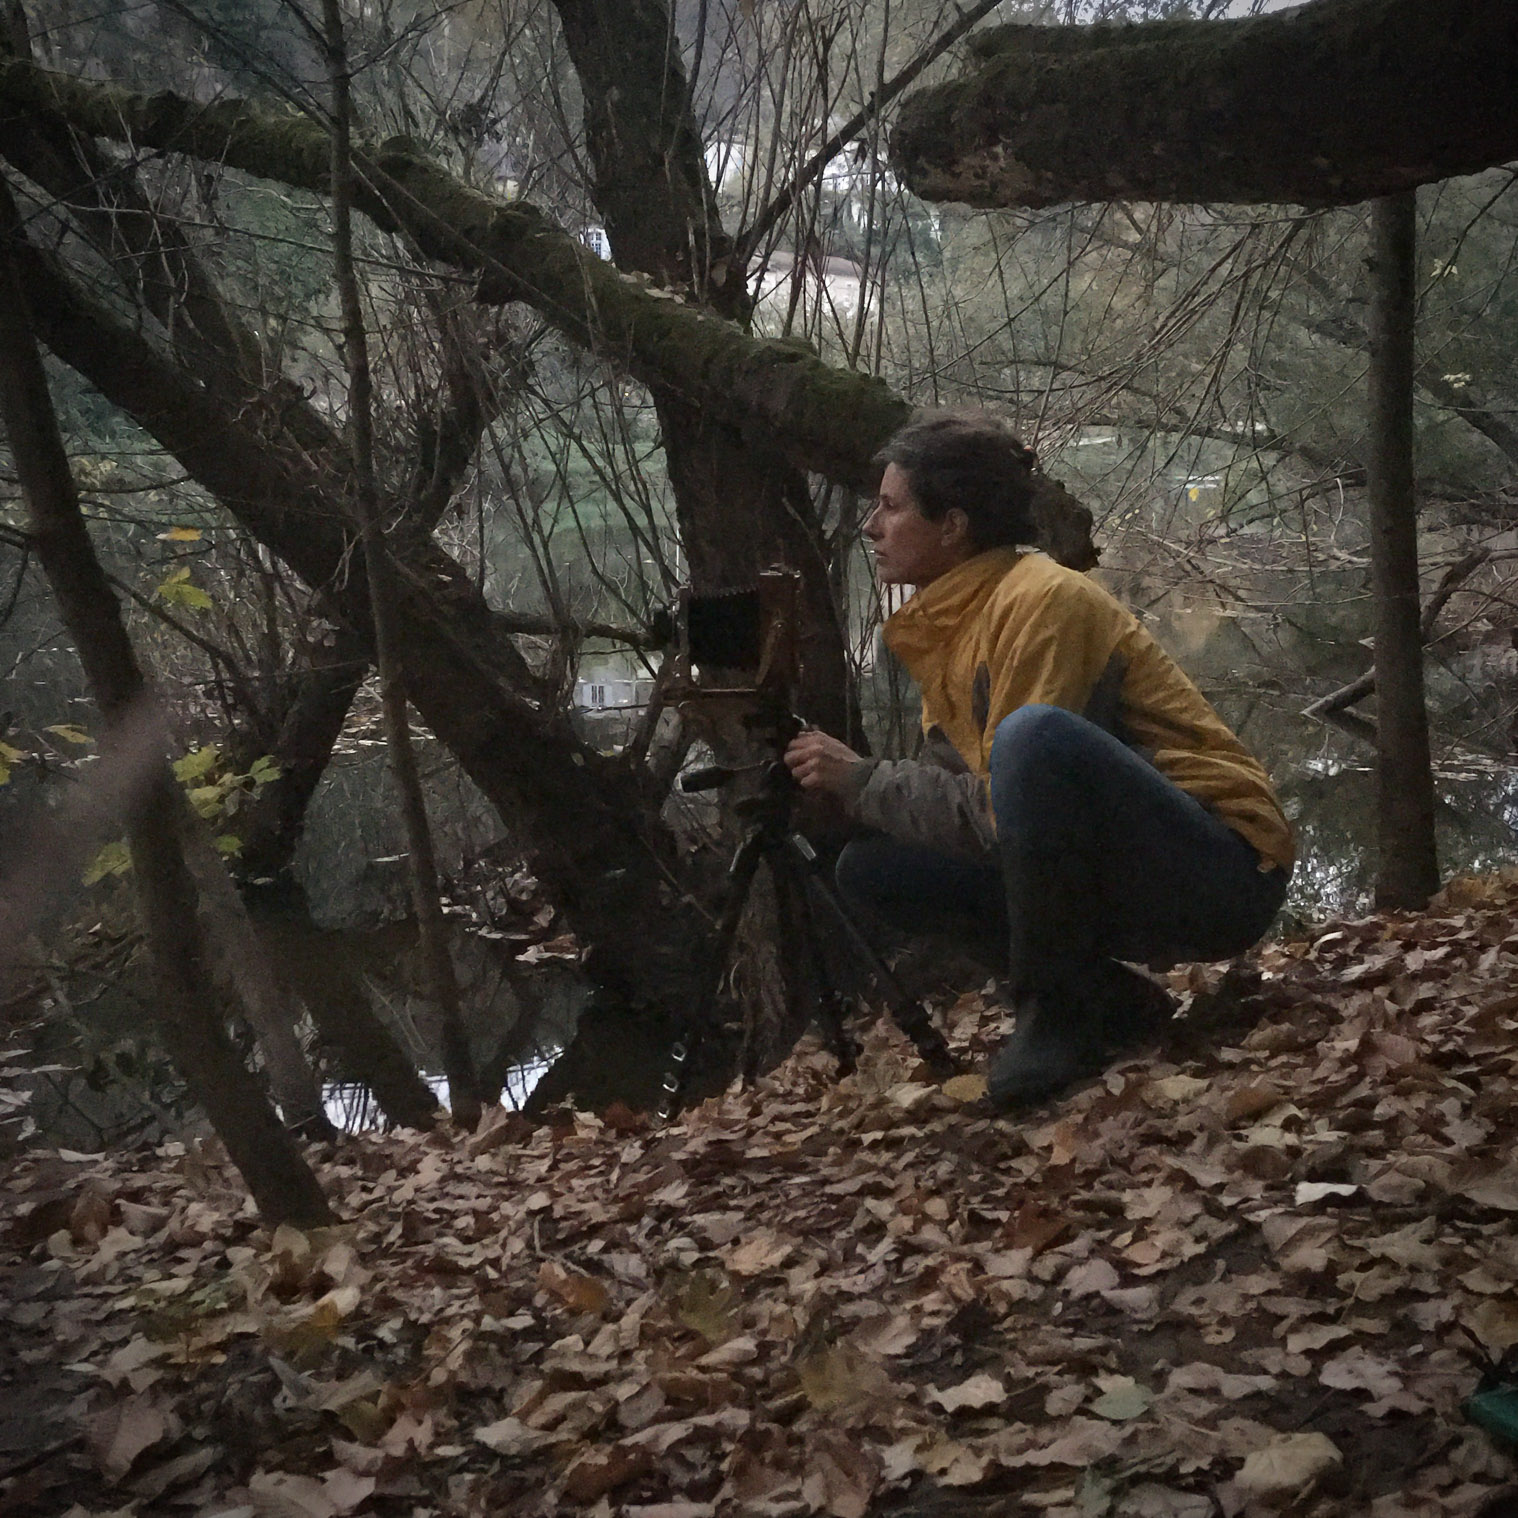 Rebecca Marshall squatting in a yellow jacket behind a wooden field camera in the woods